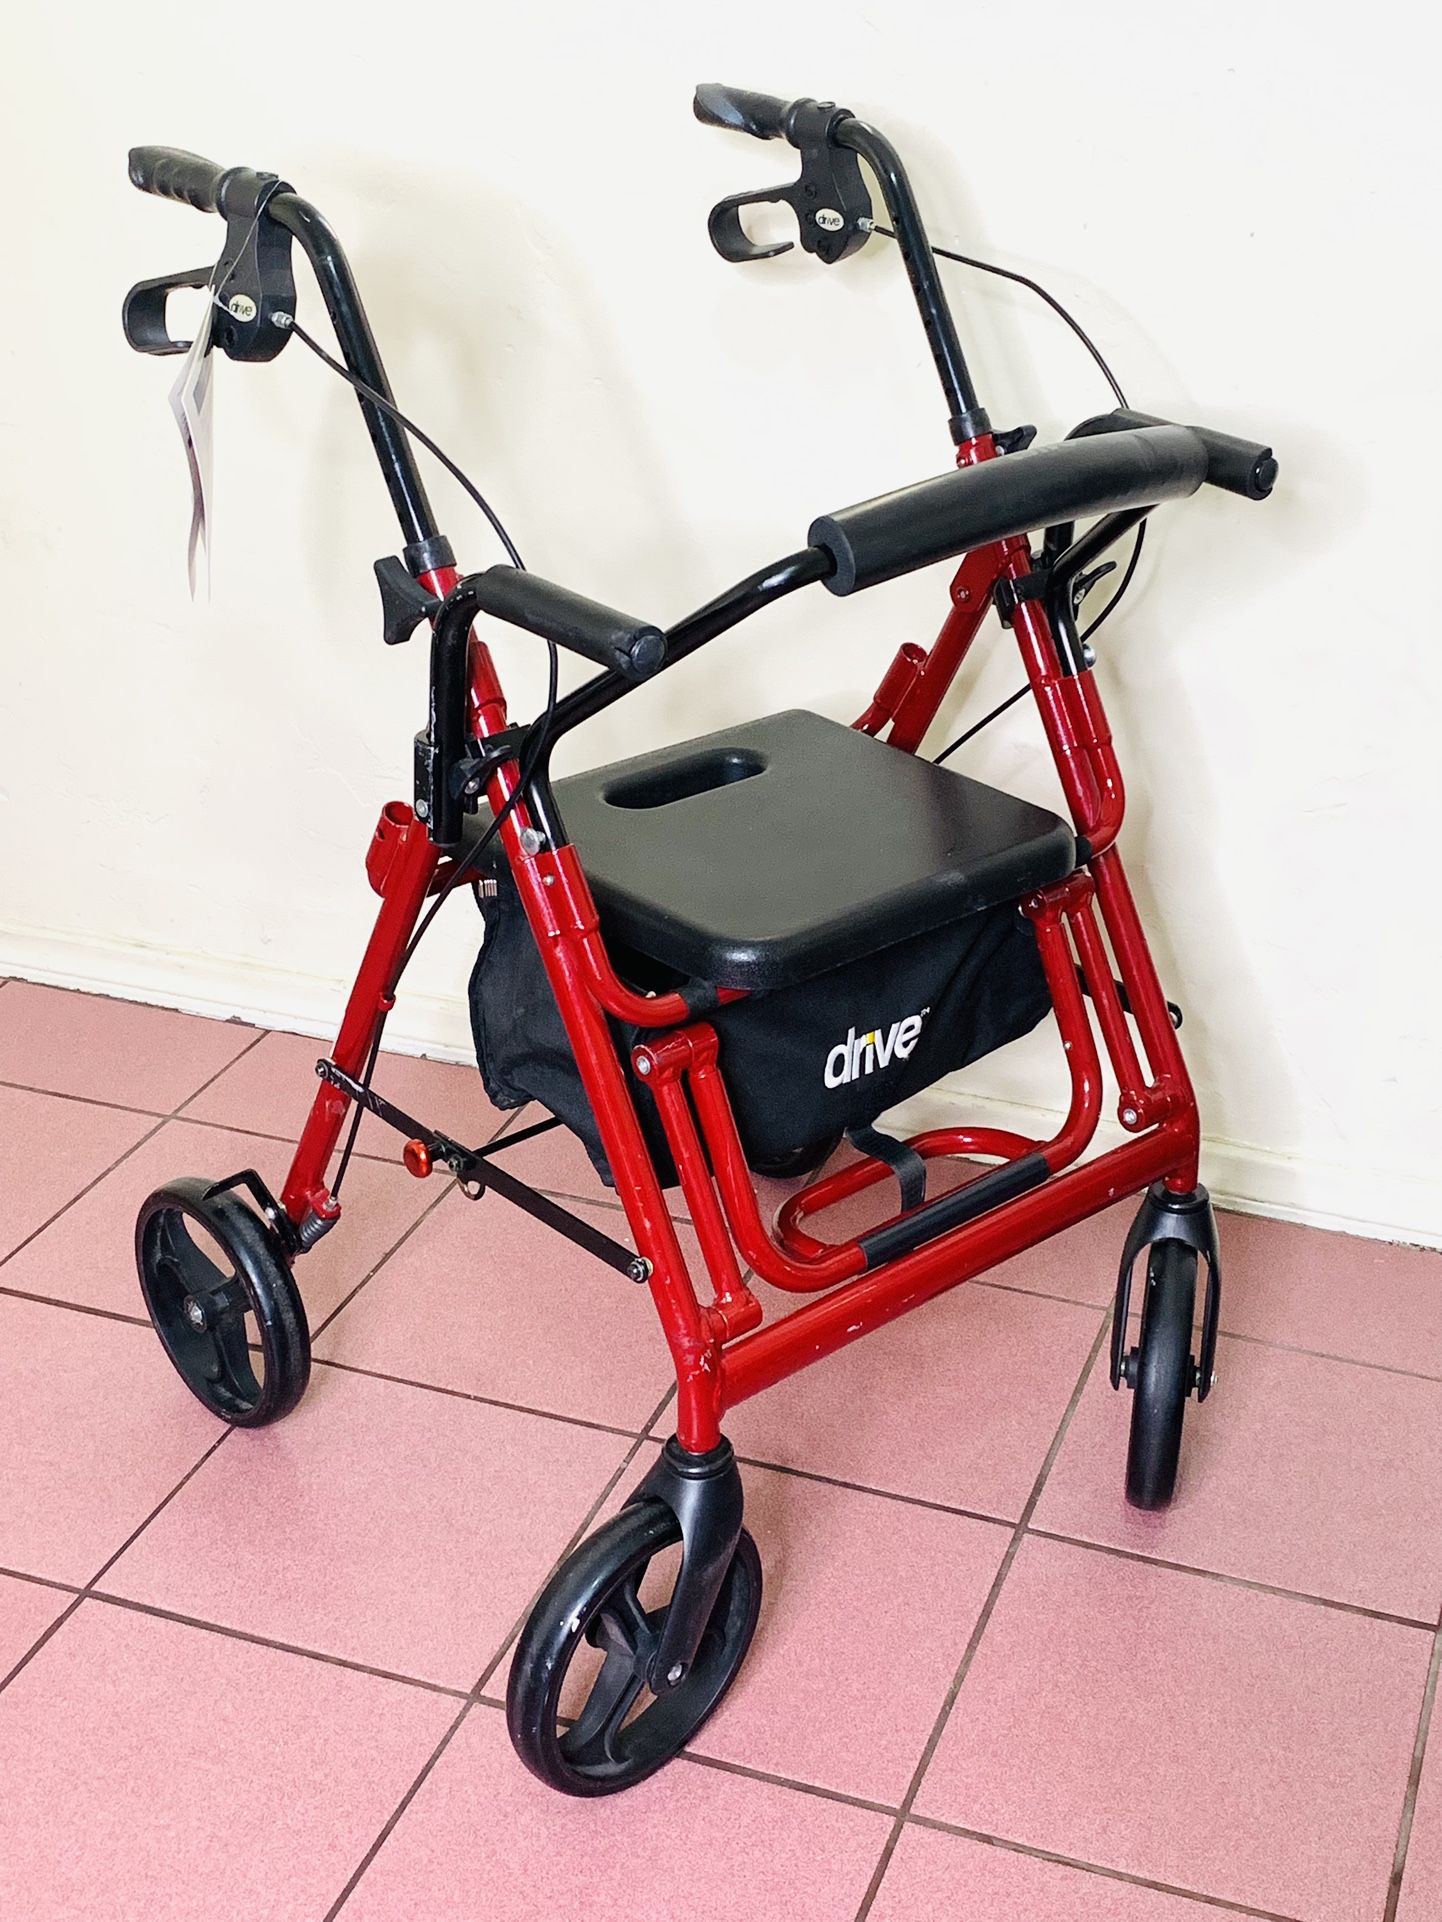 Duet drive Mobility  Walker 2 in 1. Excellent ✅